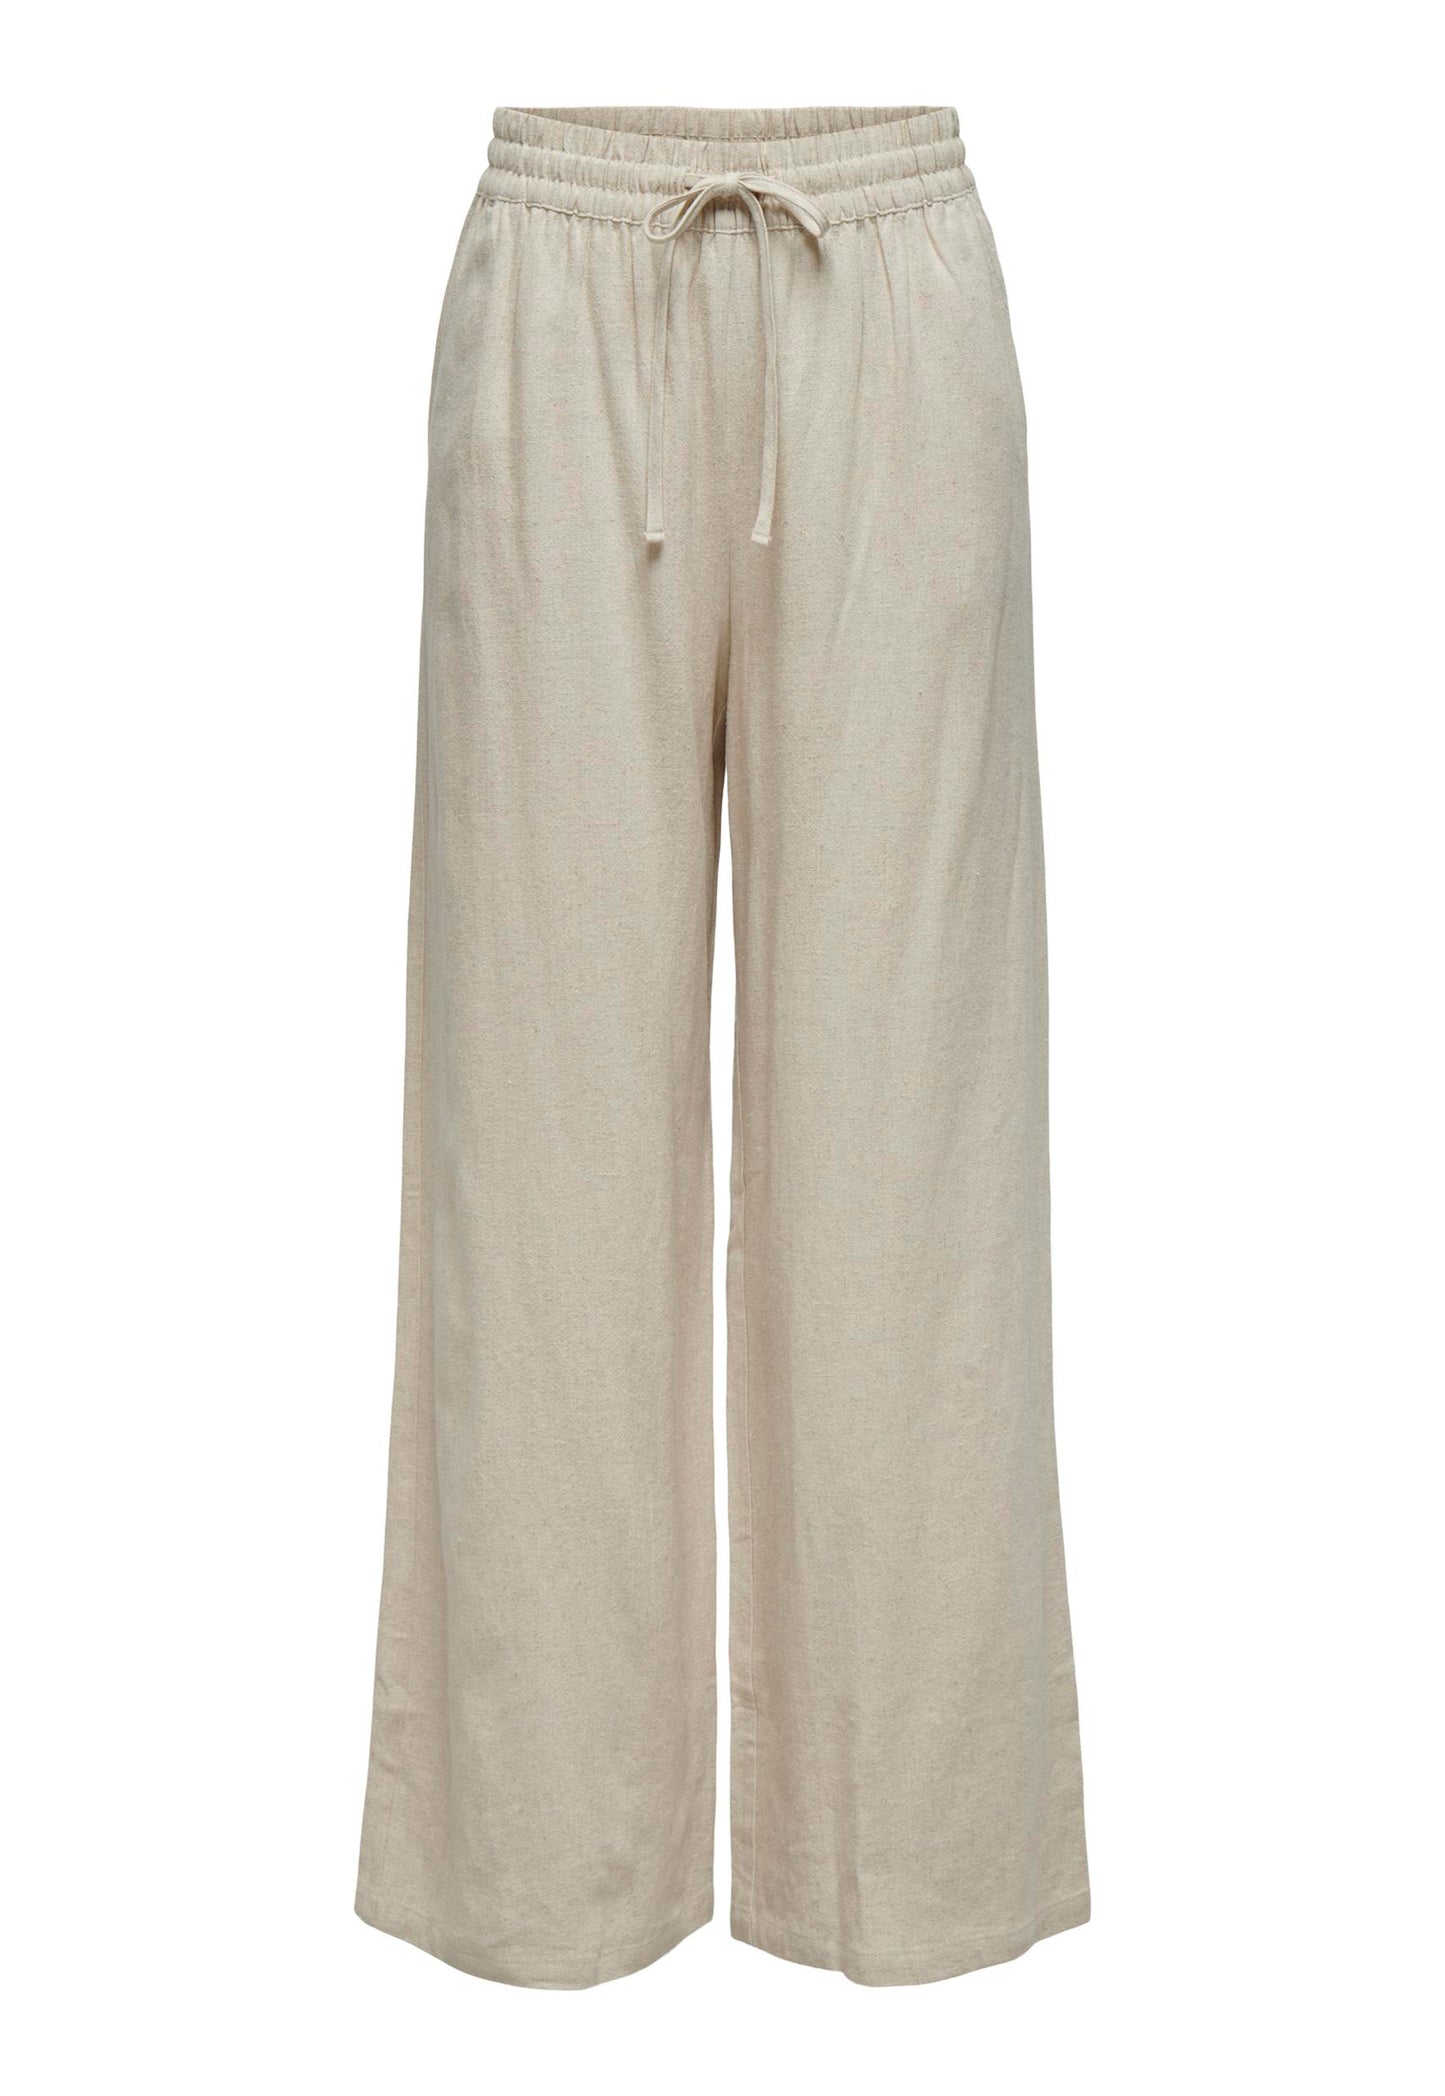 
                  
                    JDY Say High Waisted Wide Leg Linen Trousers with Tie Waist in Beige - One Nation Clothing
                  
                